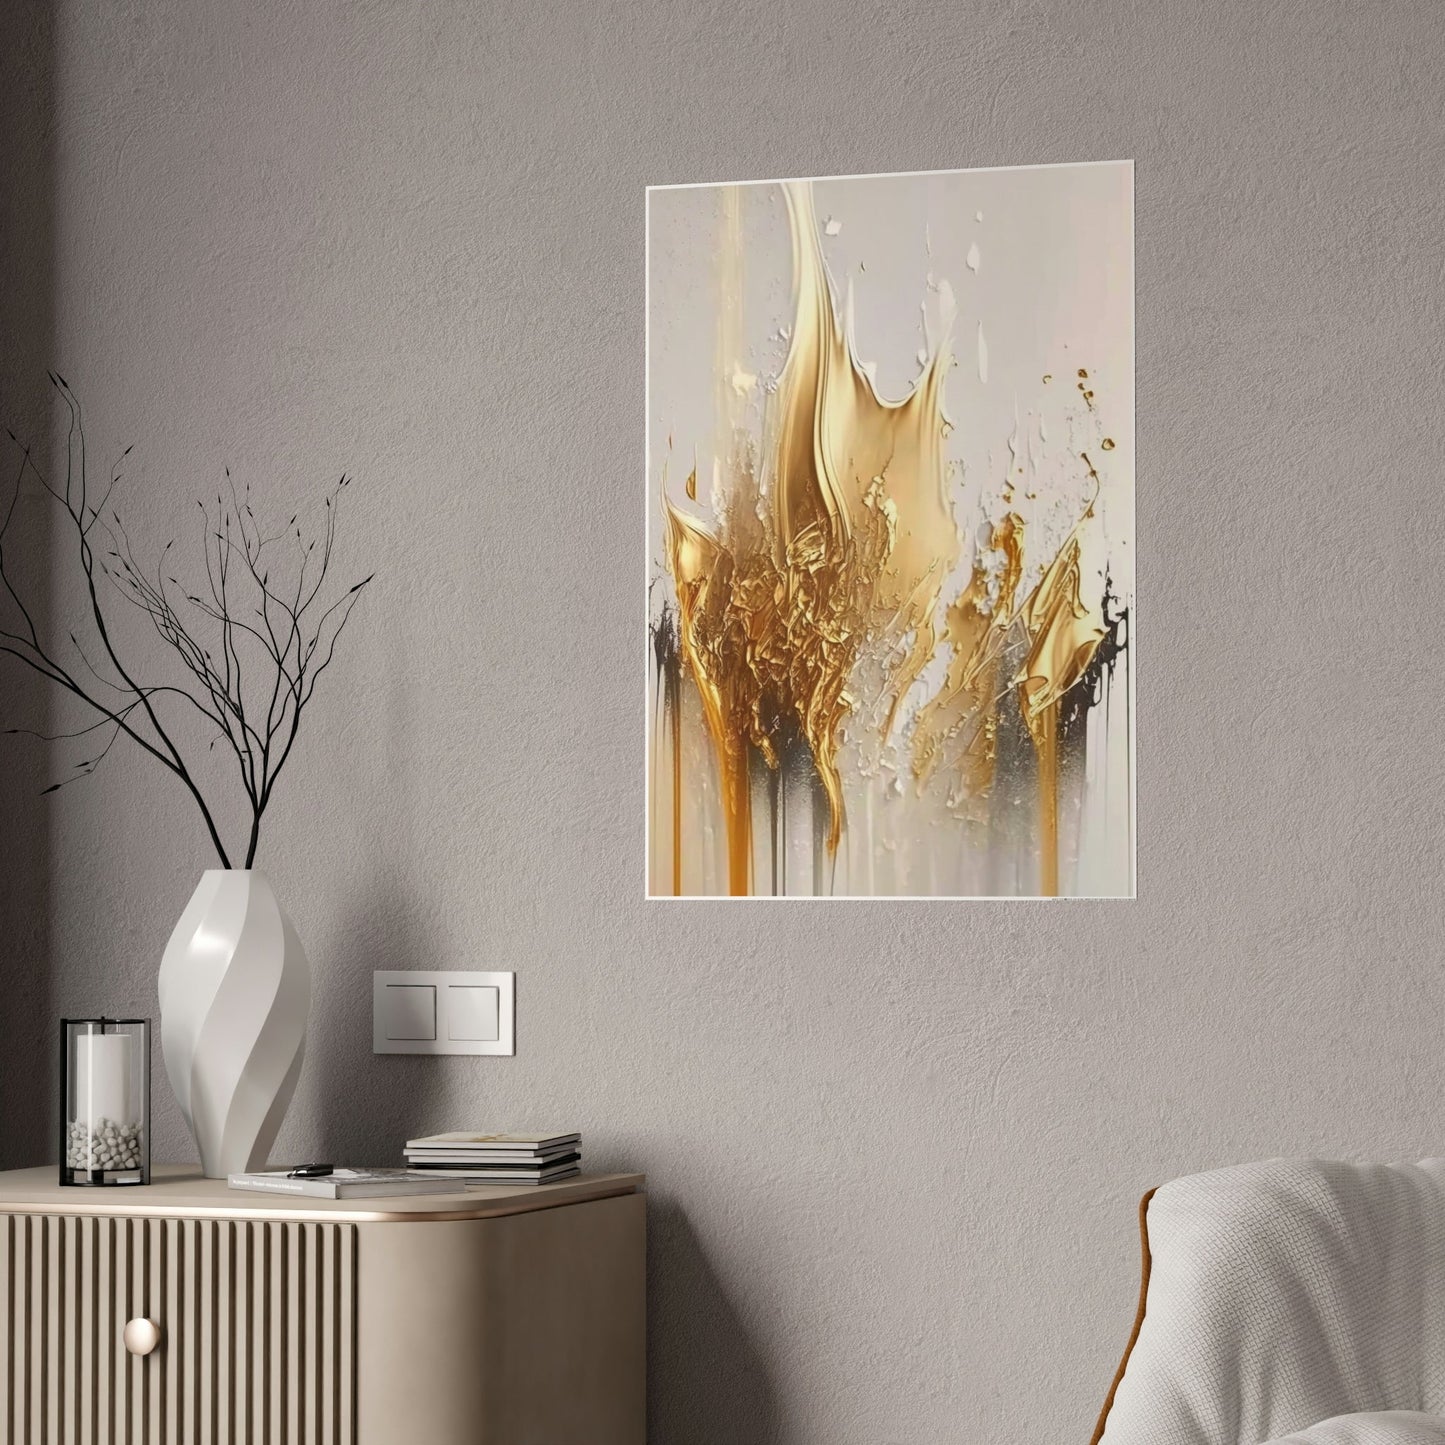 Gilded Beauty: Print on Canvas of a Glamorous and Rich Abstract Art in Gold Hues on Natural Canvas